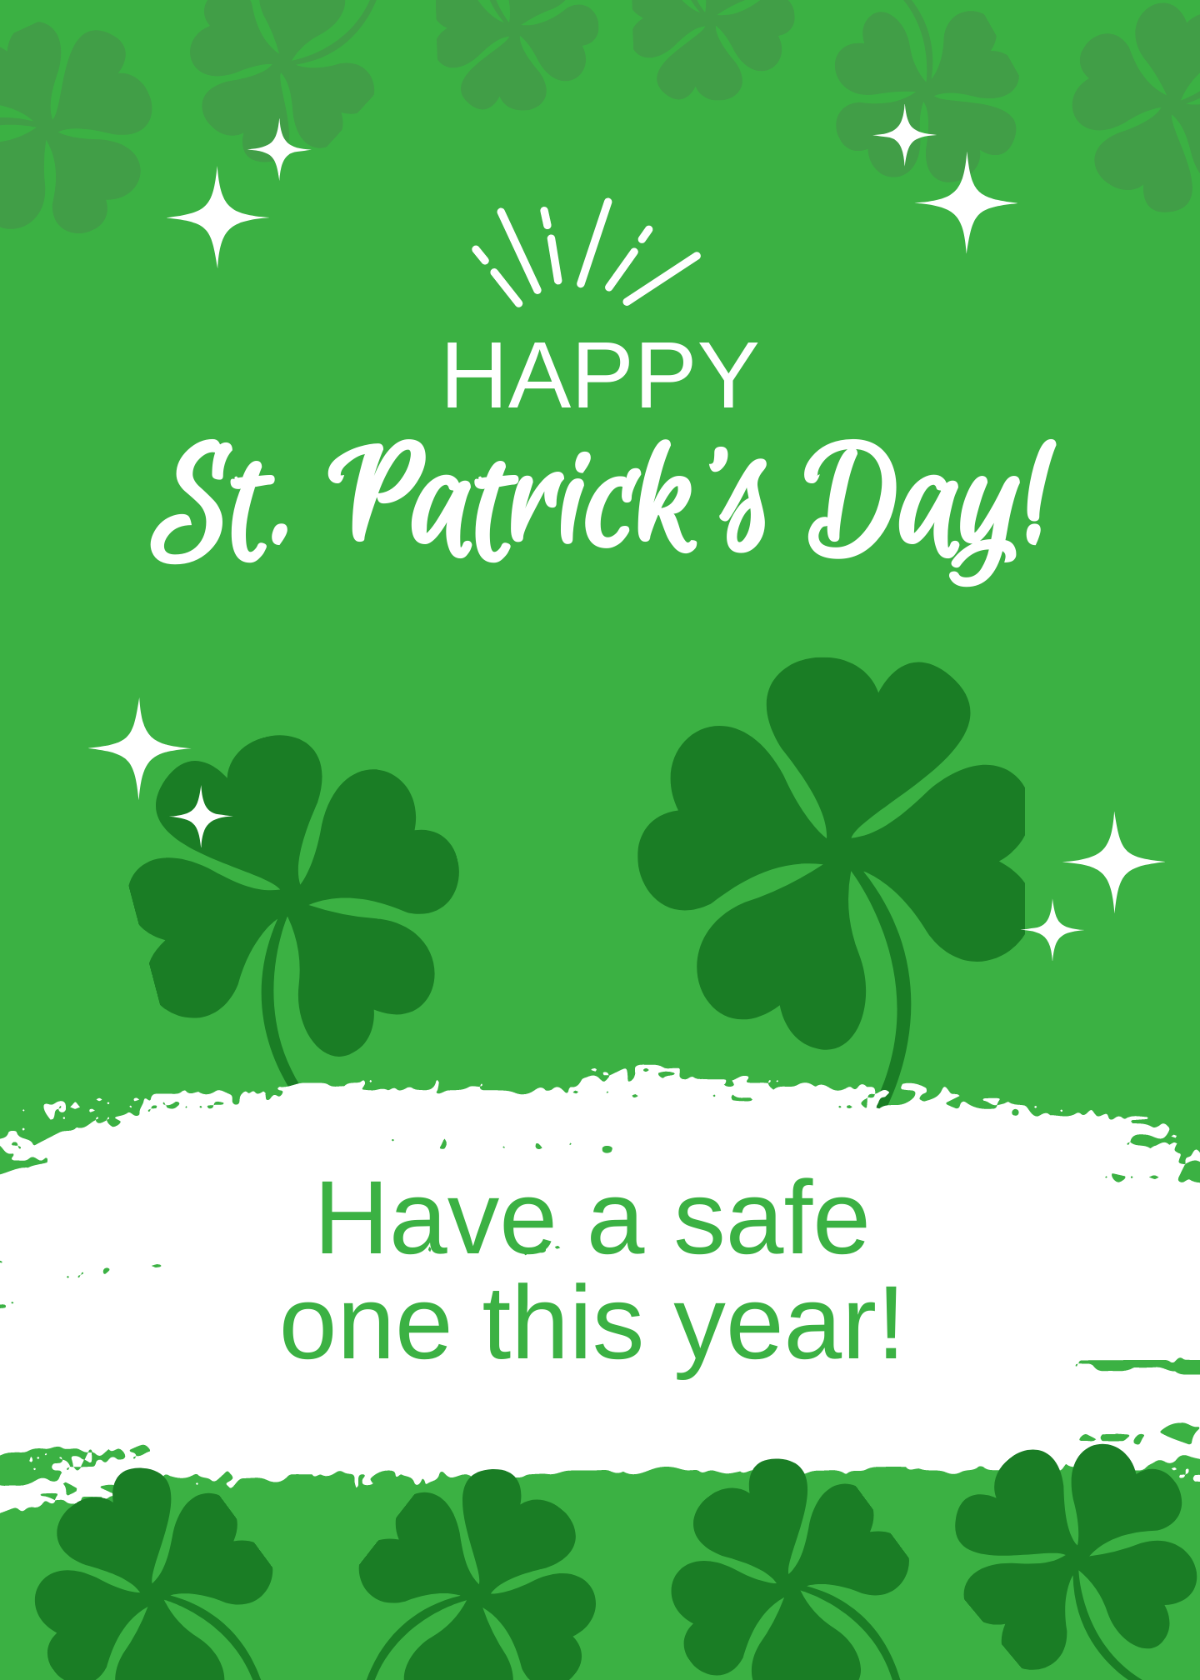 St. Patrick's Day Message Template